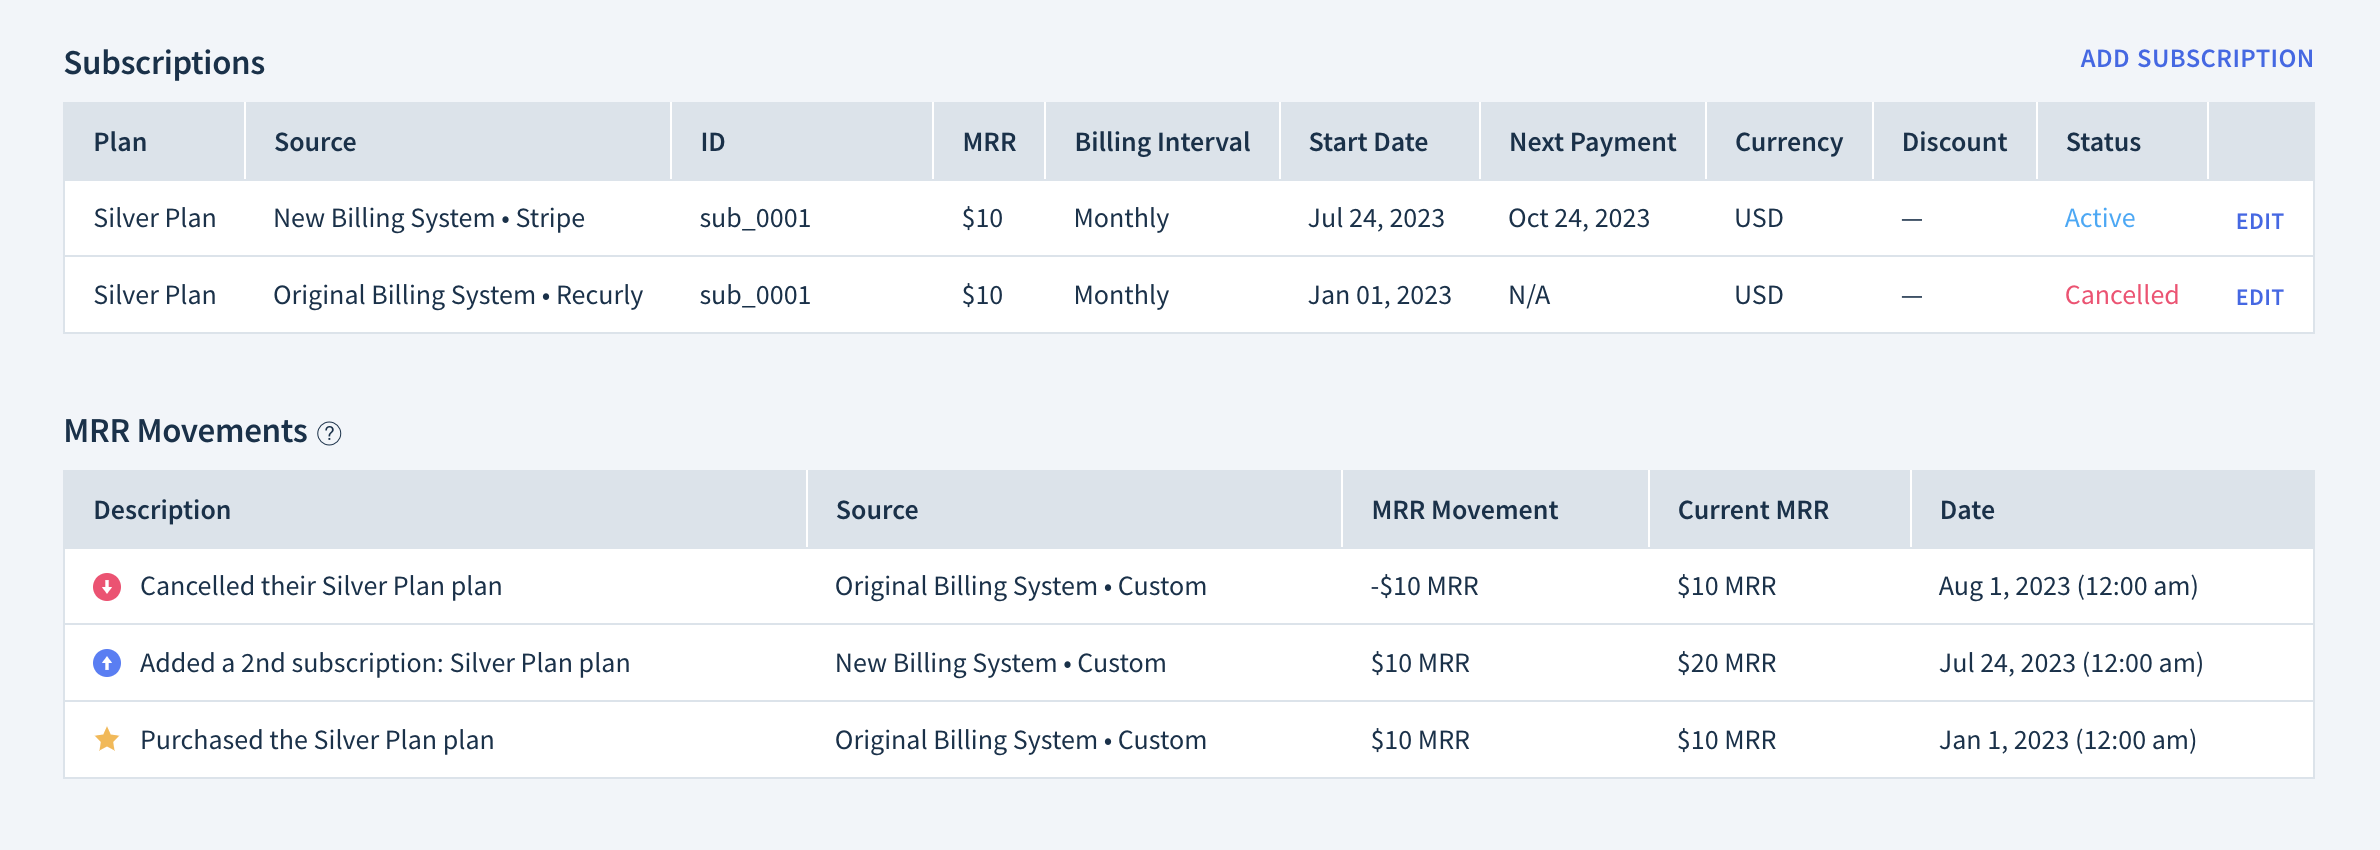 Screenshot of the Subscriptions section showing one subscription from the original billing system and one subscription from the new billing system. The MRR Movements table below contains information about purchasing and canceling a plan in the original billing system and about adding a second plan in the new billing system.